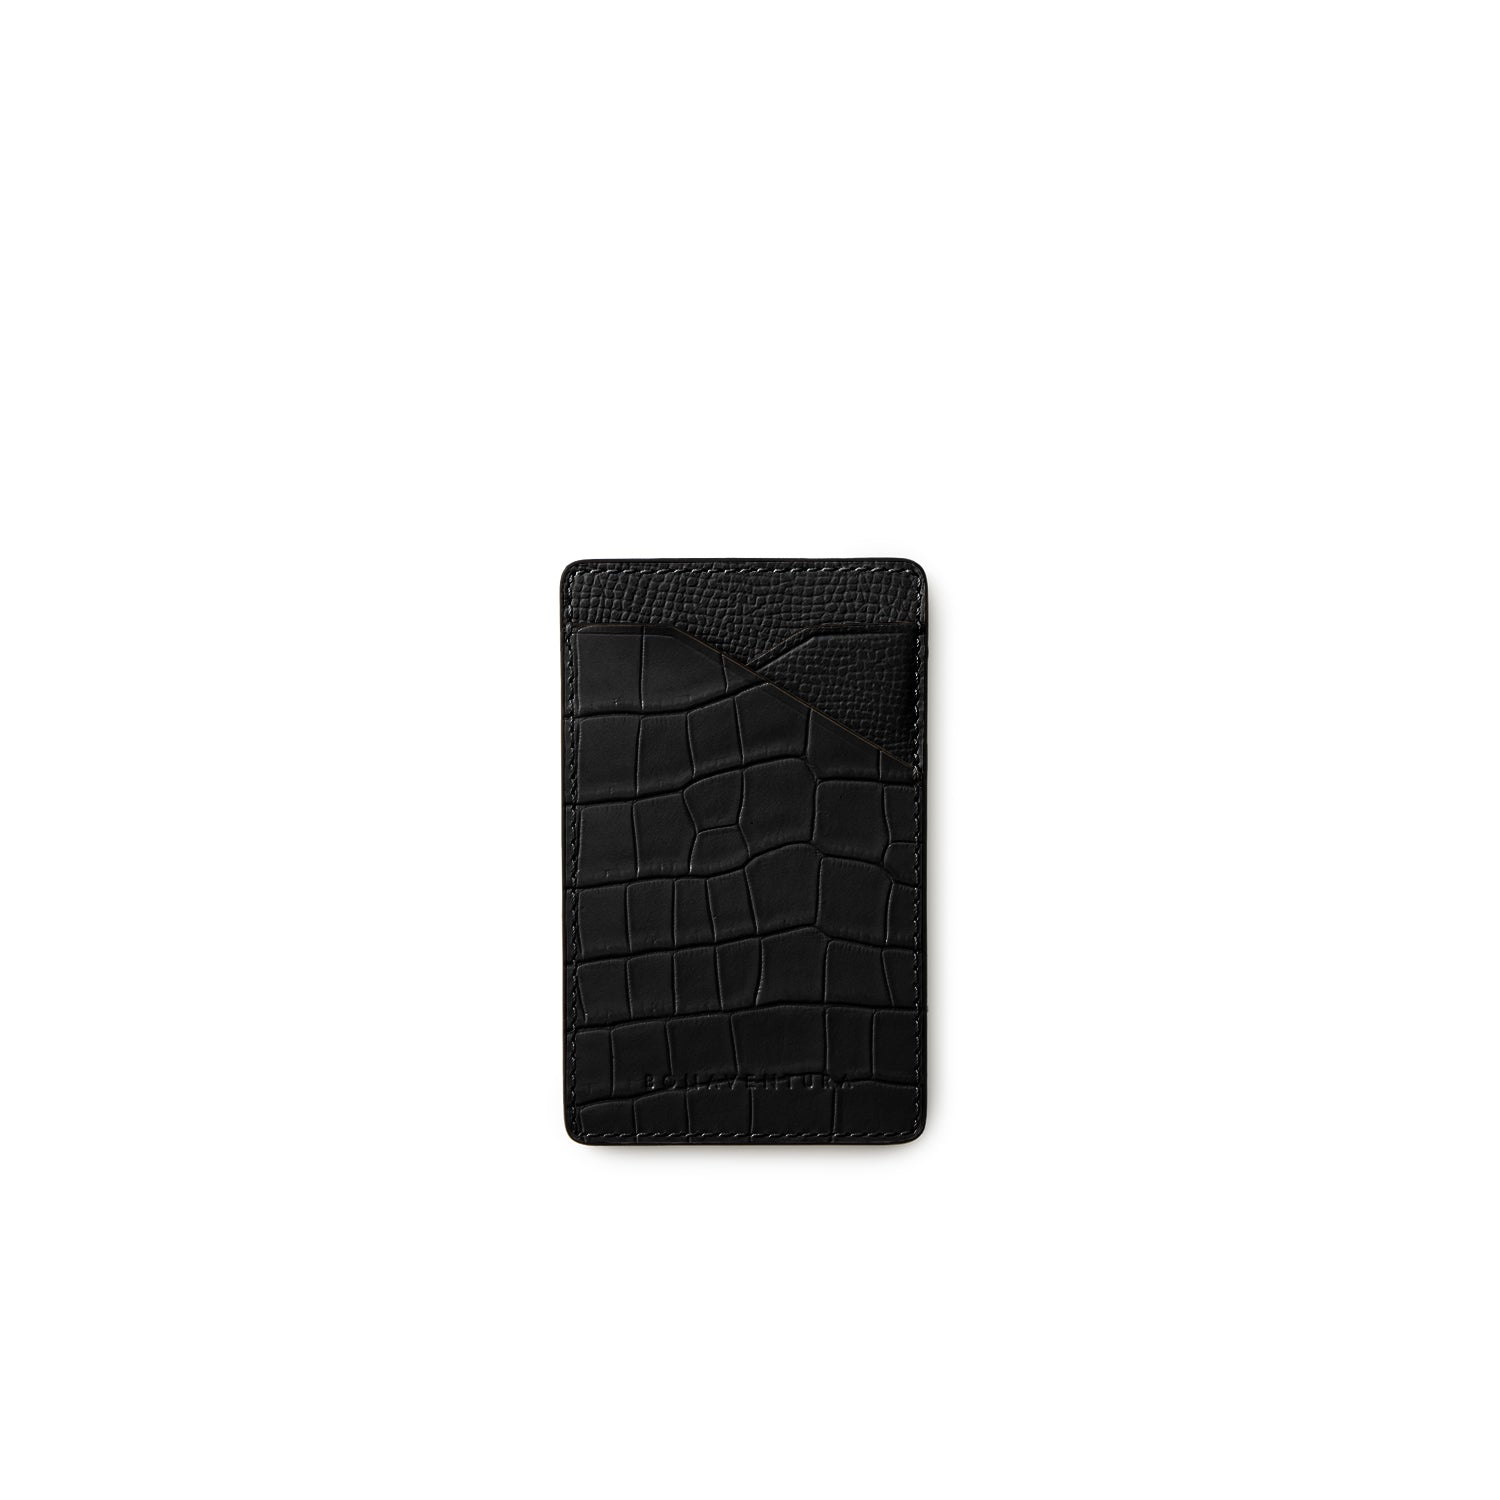 Detachable card slot in Noblesse x embossed crocodile leather